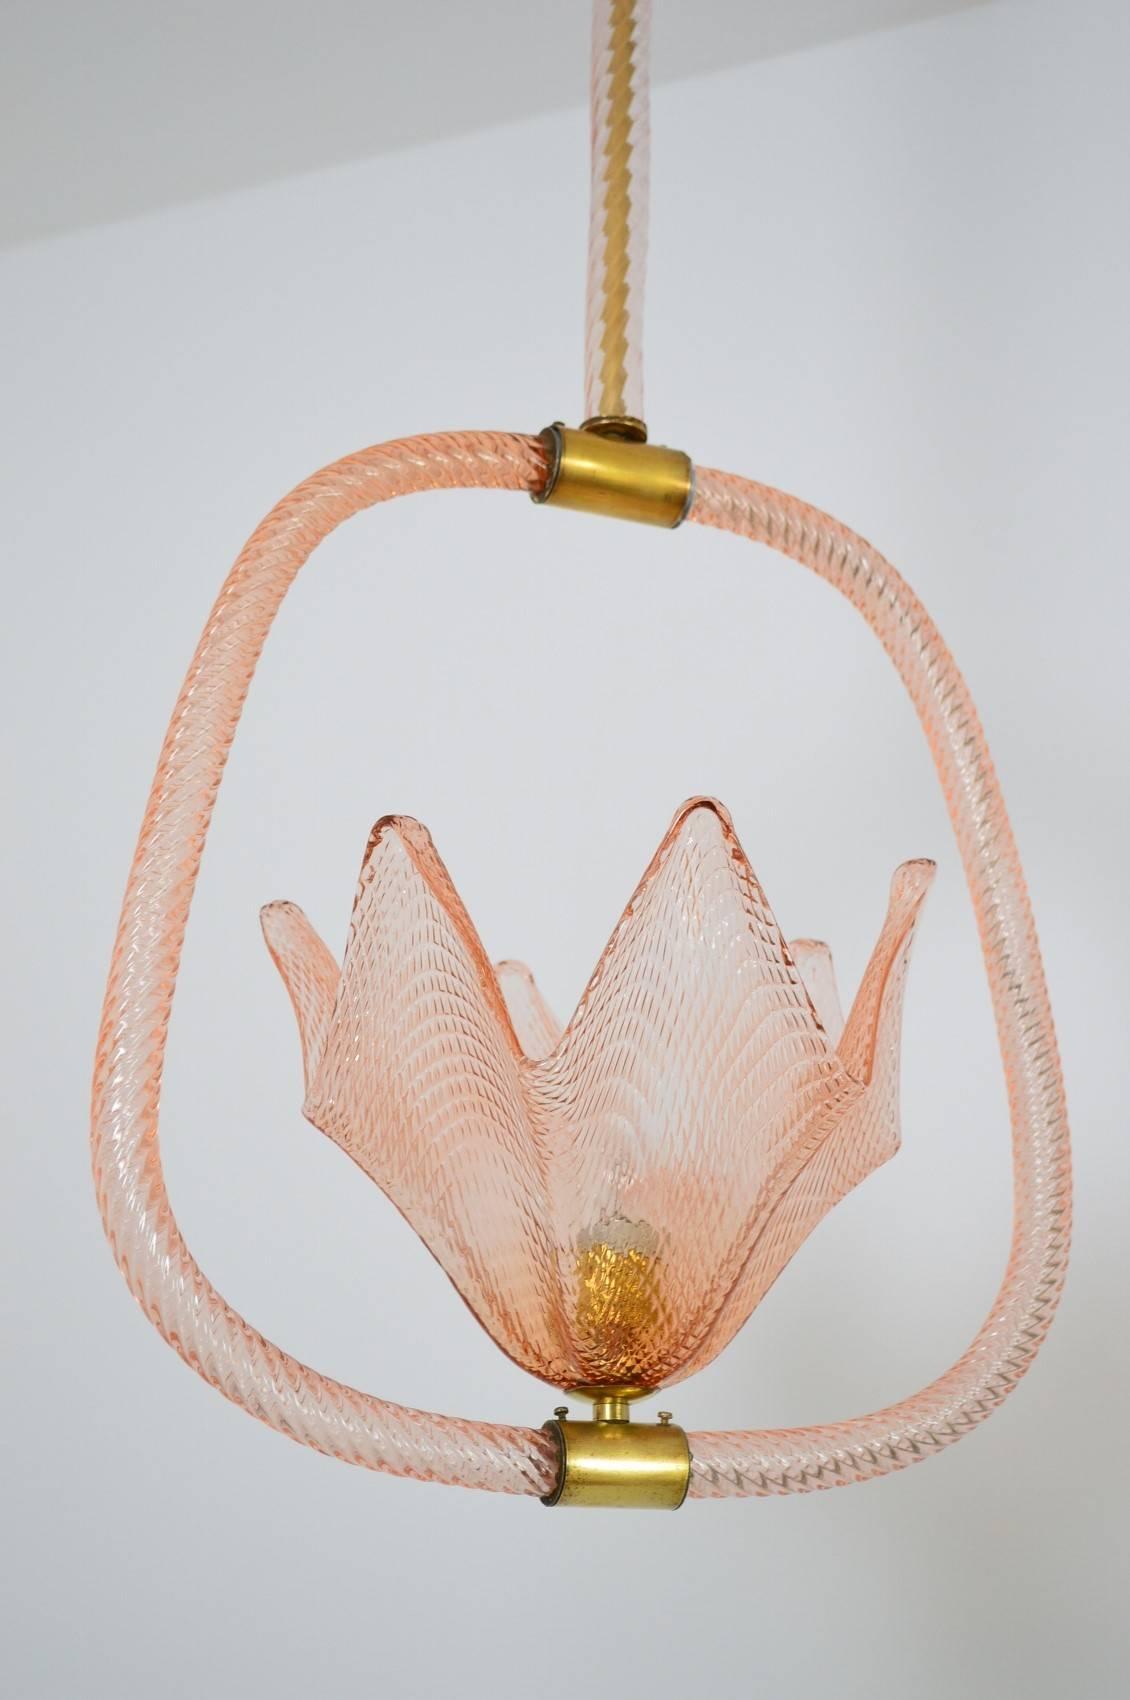 Beautiful pink Art Deco chandelier handcrafted by Ercole Barovier, Murano, Italy, 1940s.
This pink and gold chandelier, entirely handcrafted, with its large flower cup of Murano glass in the middle and the upper canopy, has been completely restored